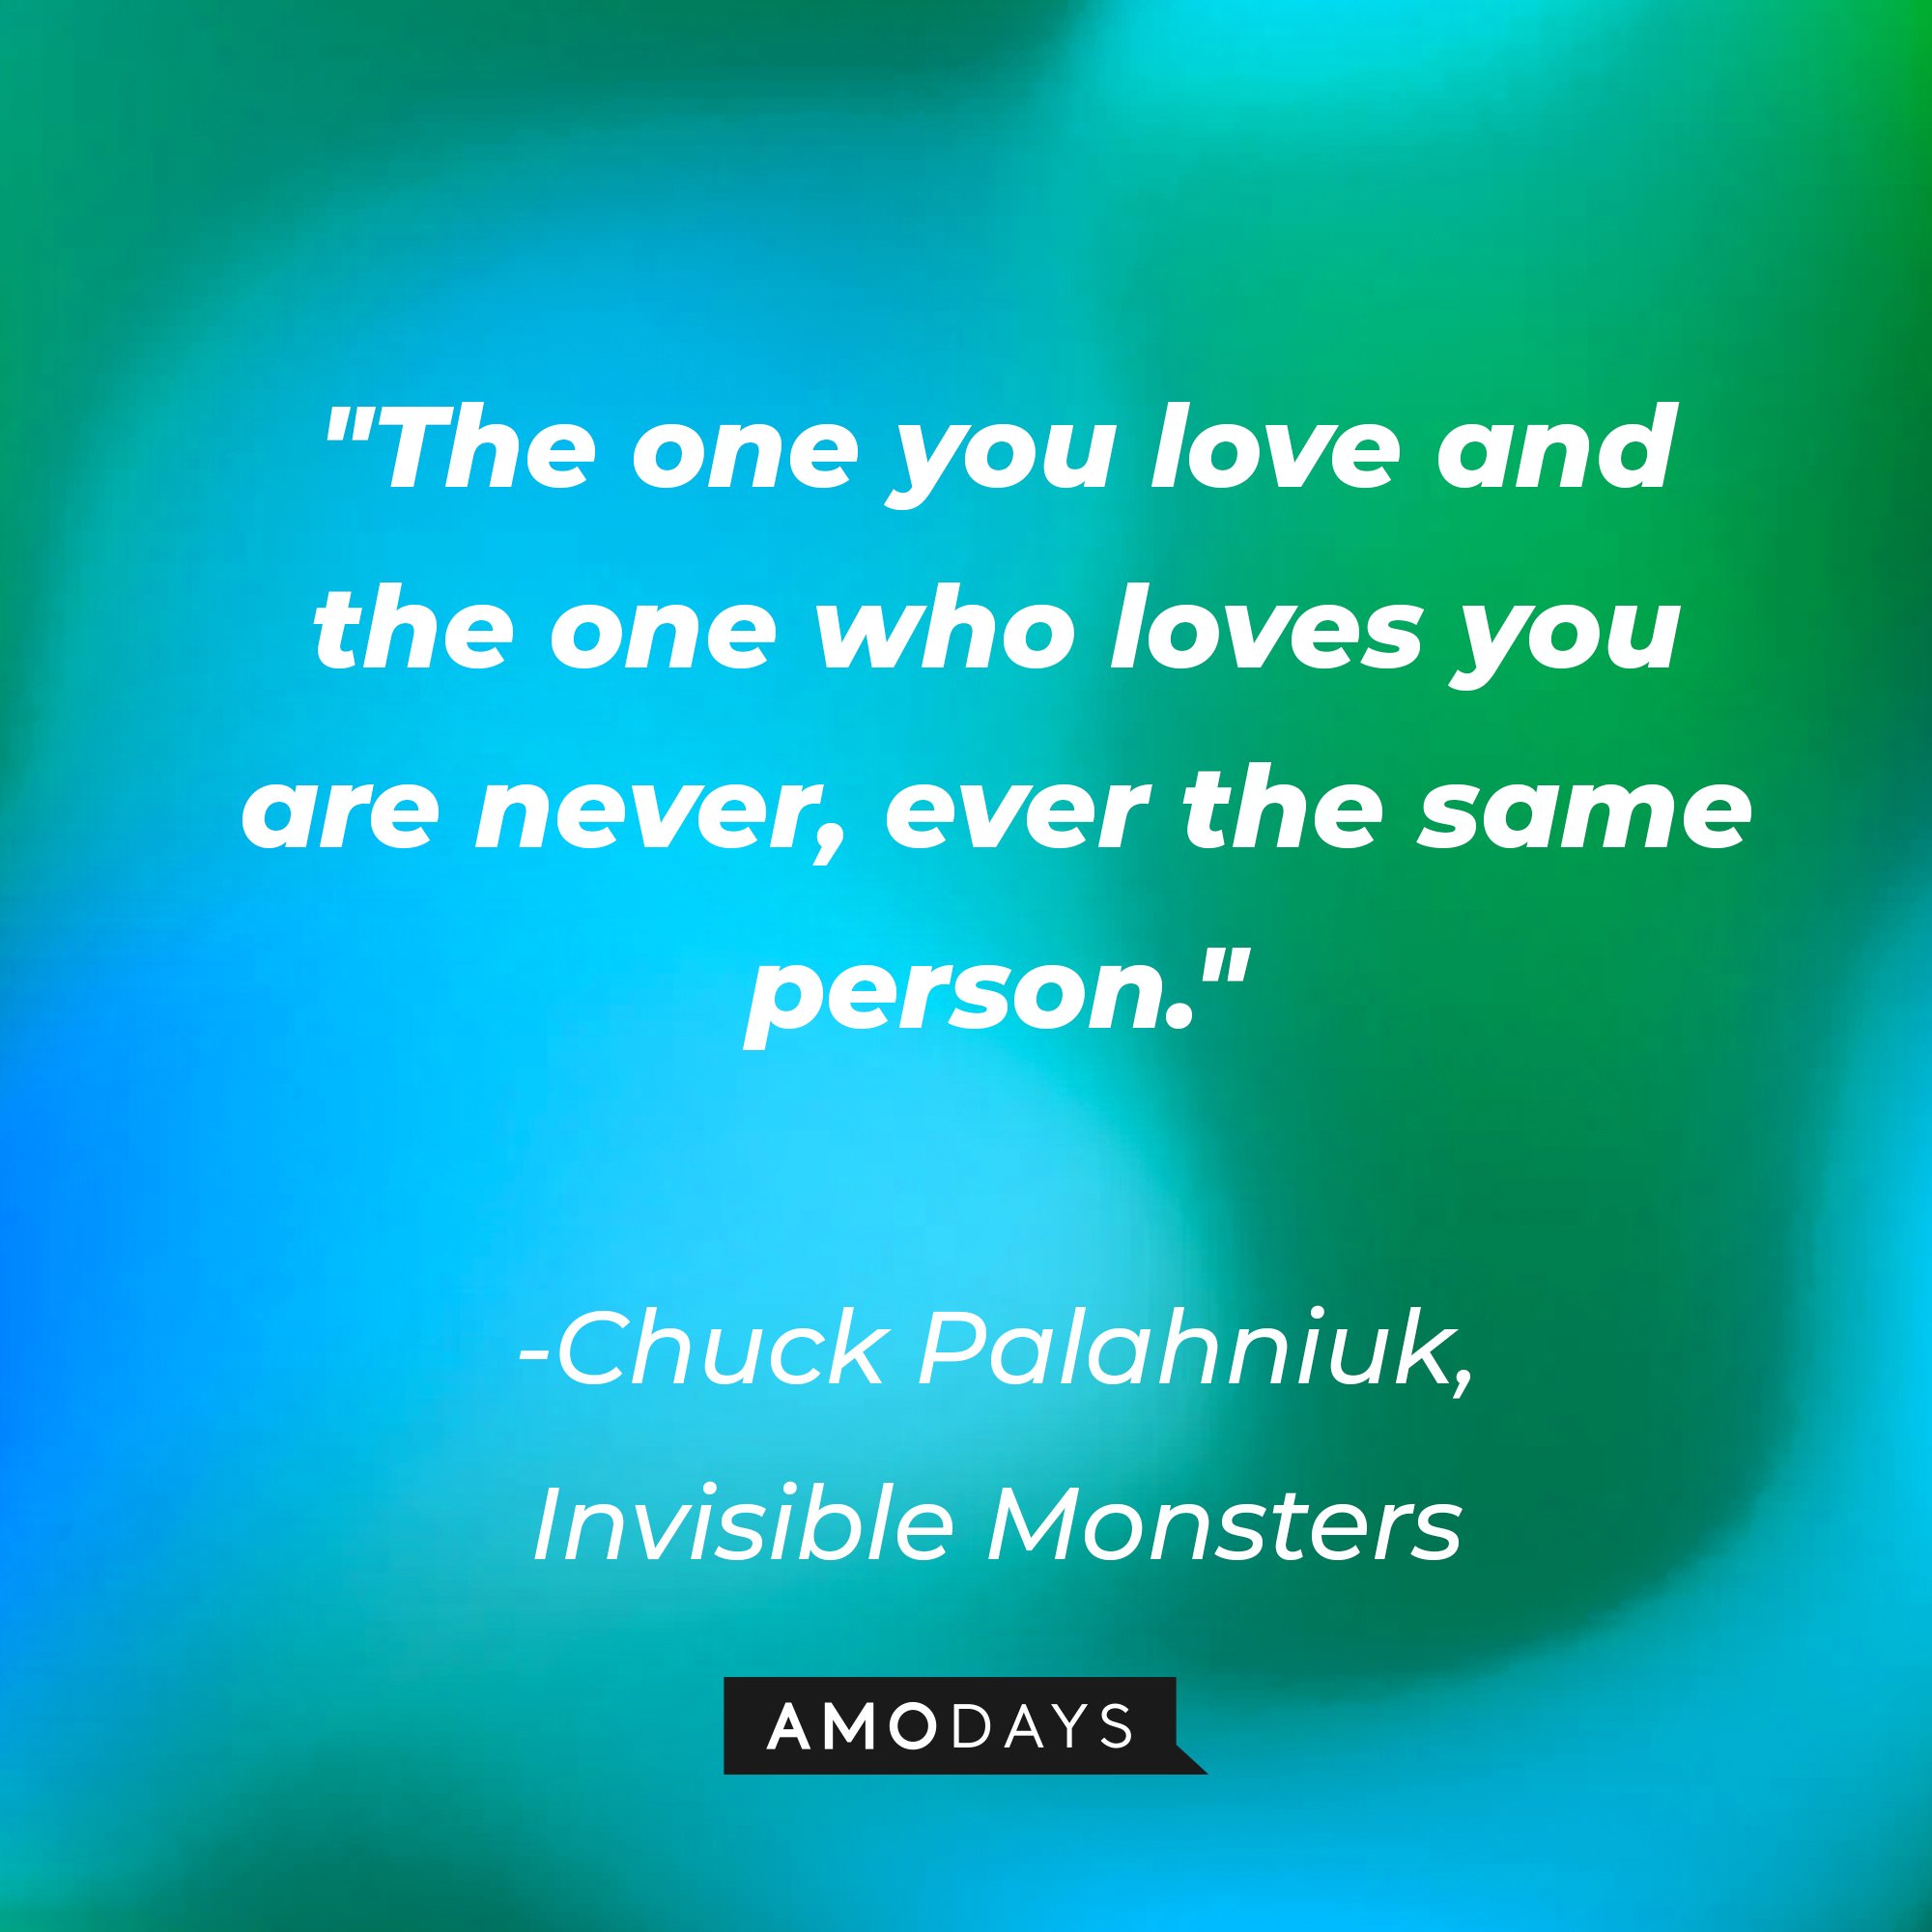 Chuck Palahniuk's quote: "The one you love and the one who loves you are never, ever the same person." | Image: Amodays